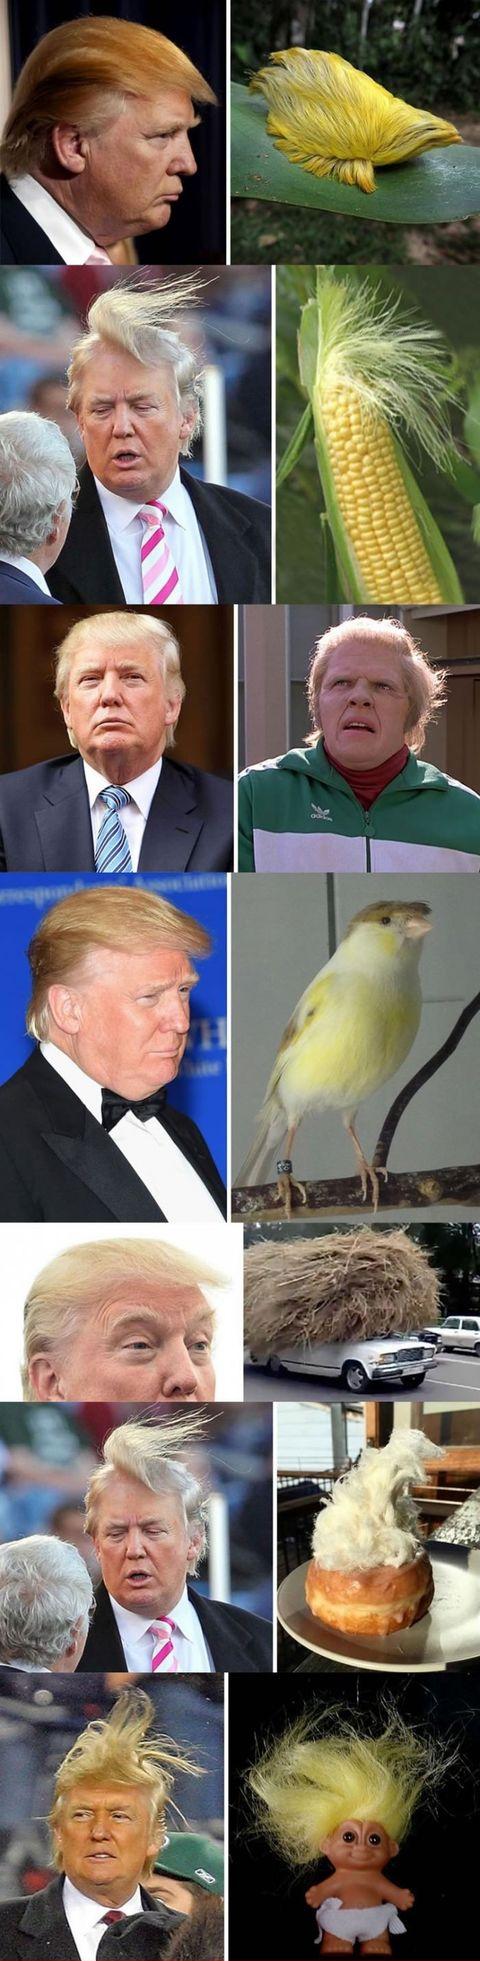 Things+that+look+like+Donald+Trump